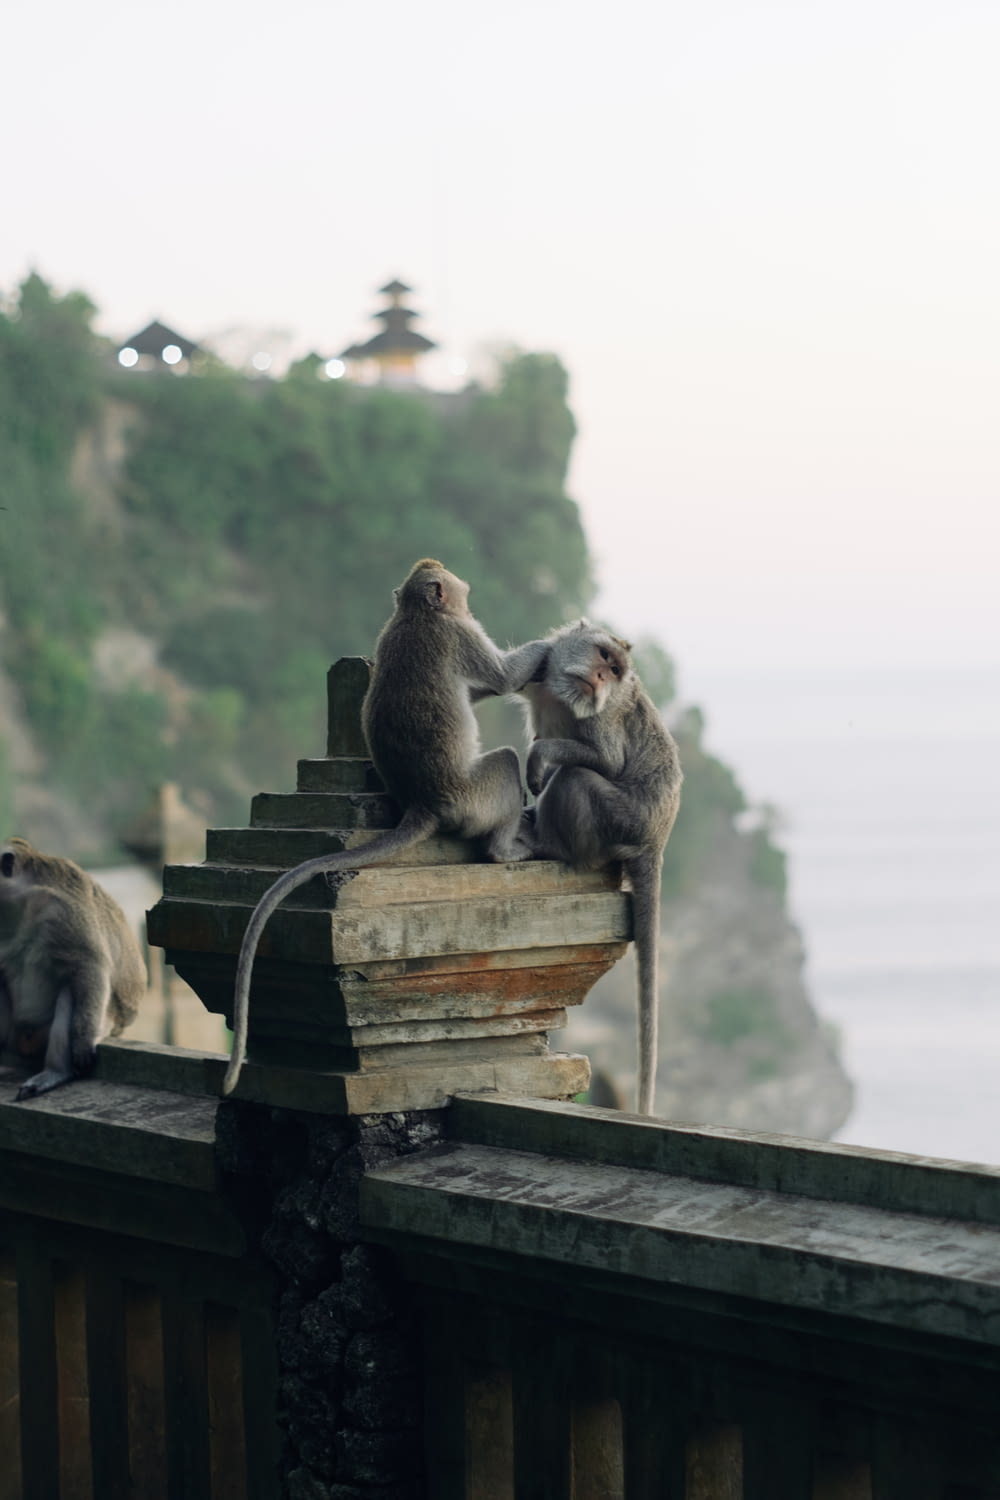 a group of monkeys sitting on top of a wooden fence